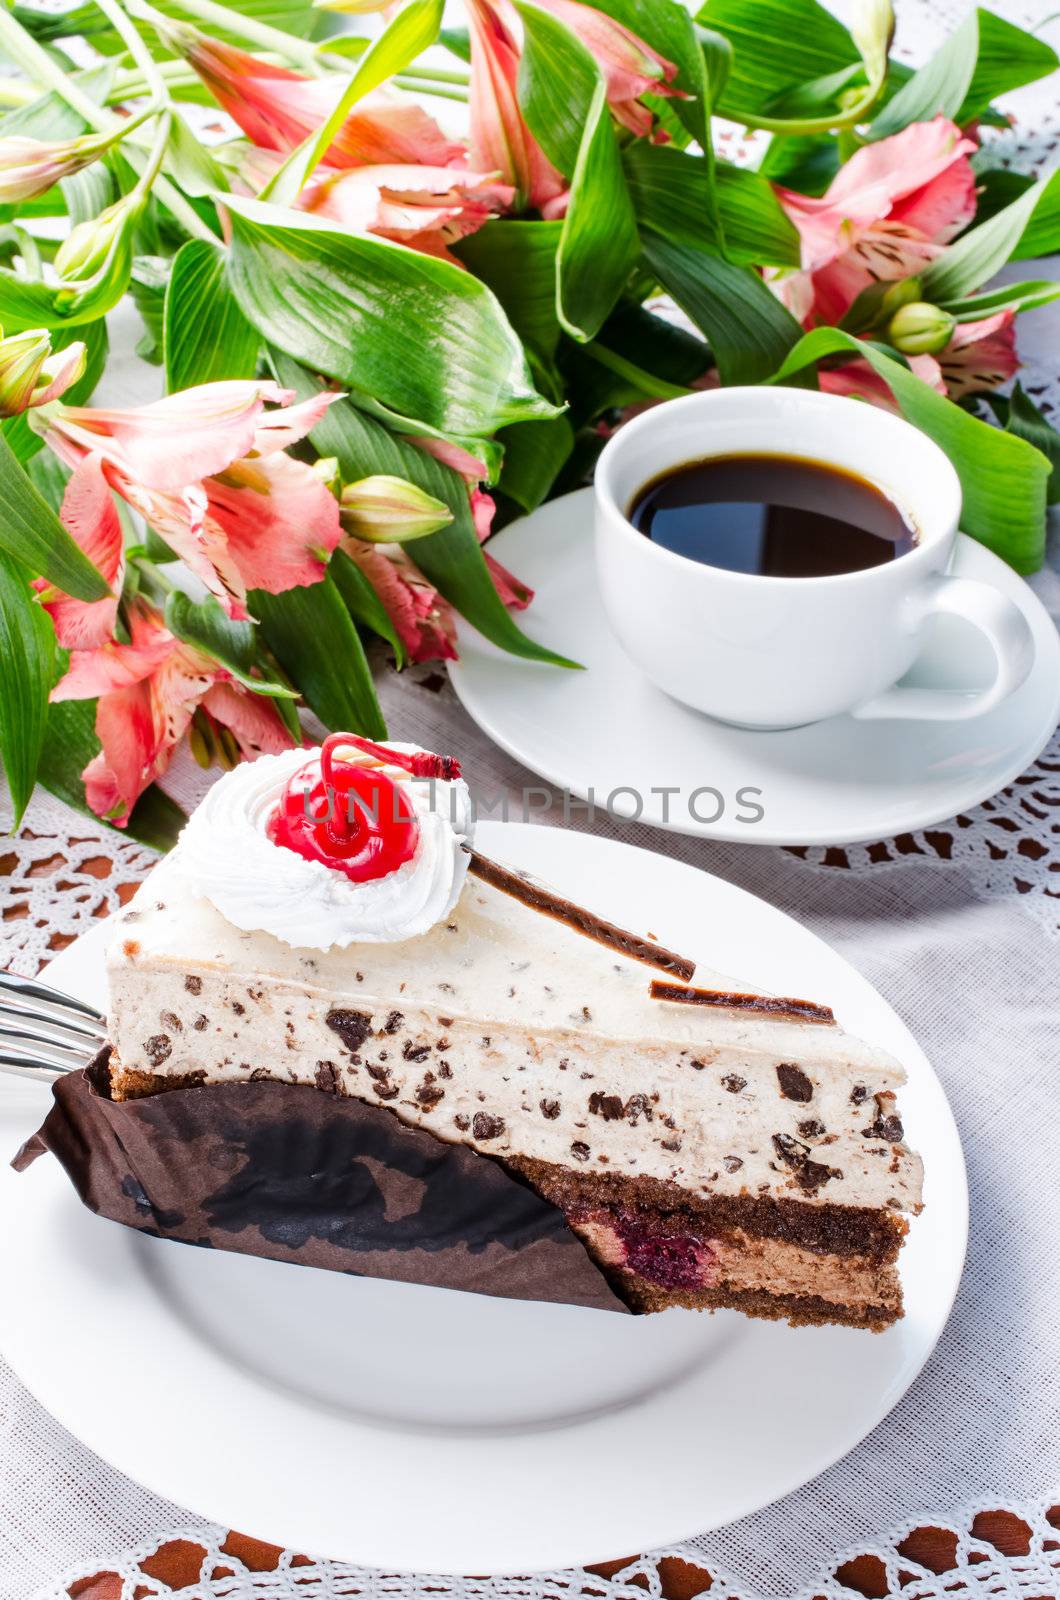 Cake coffe and flowers on table cloth